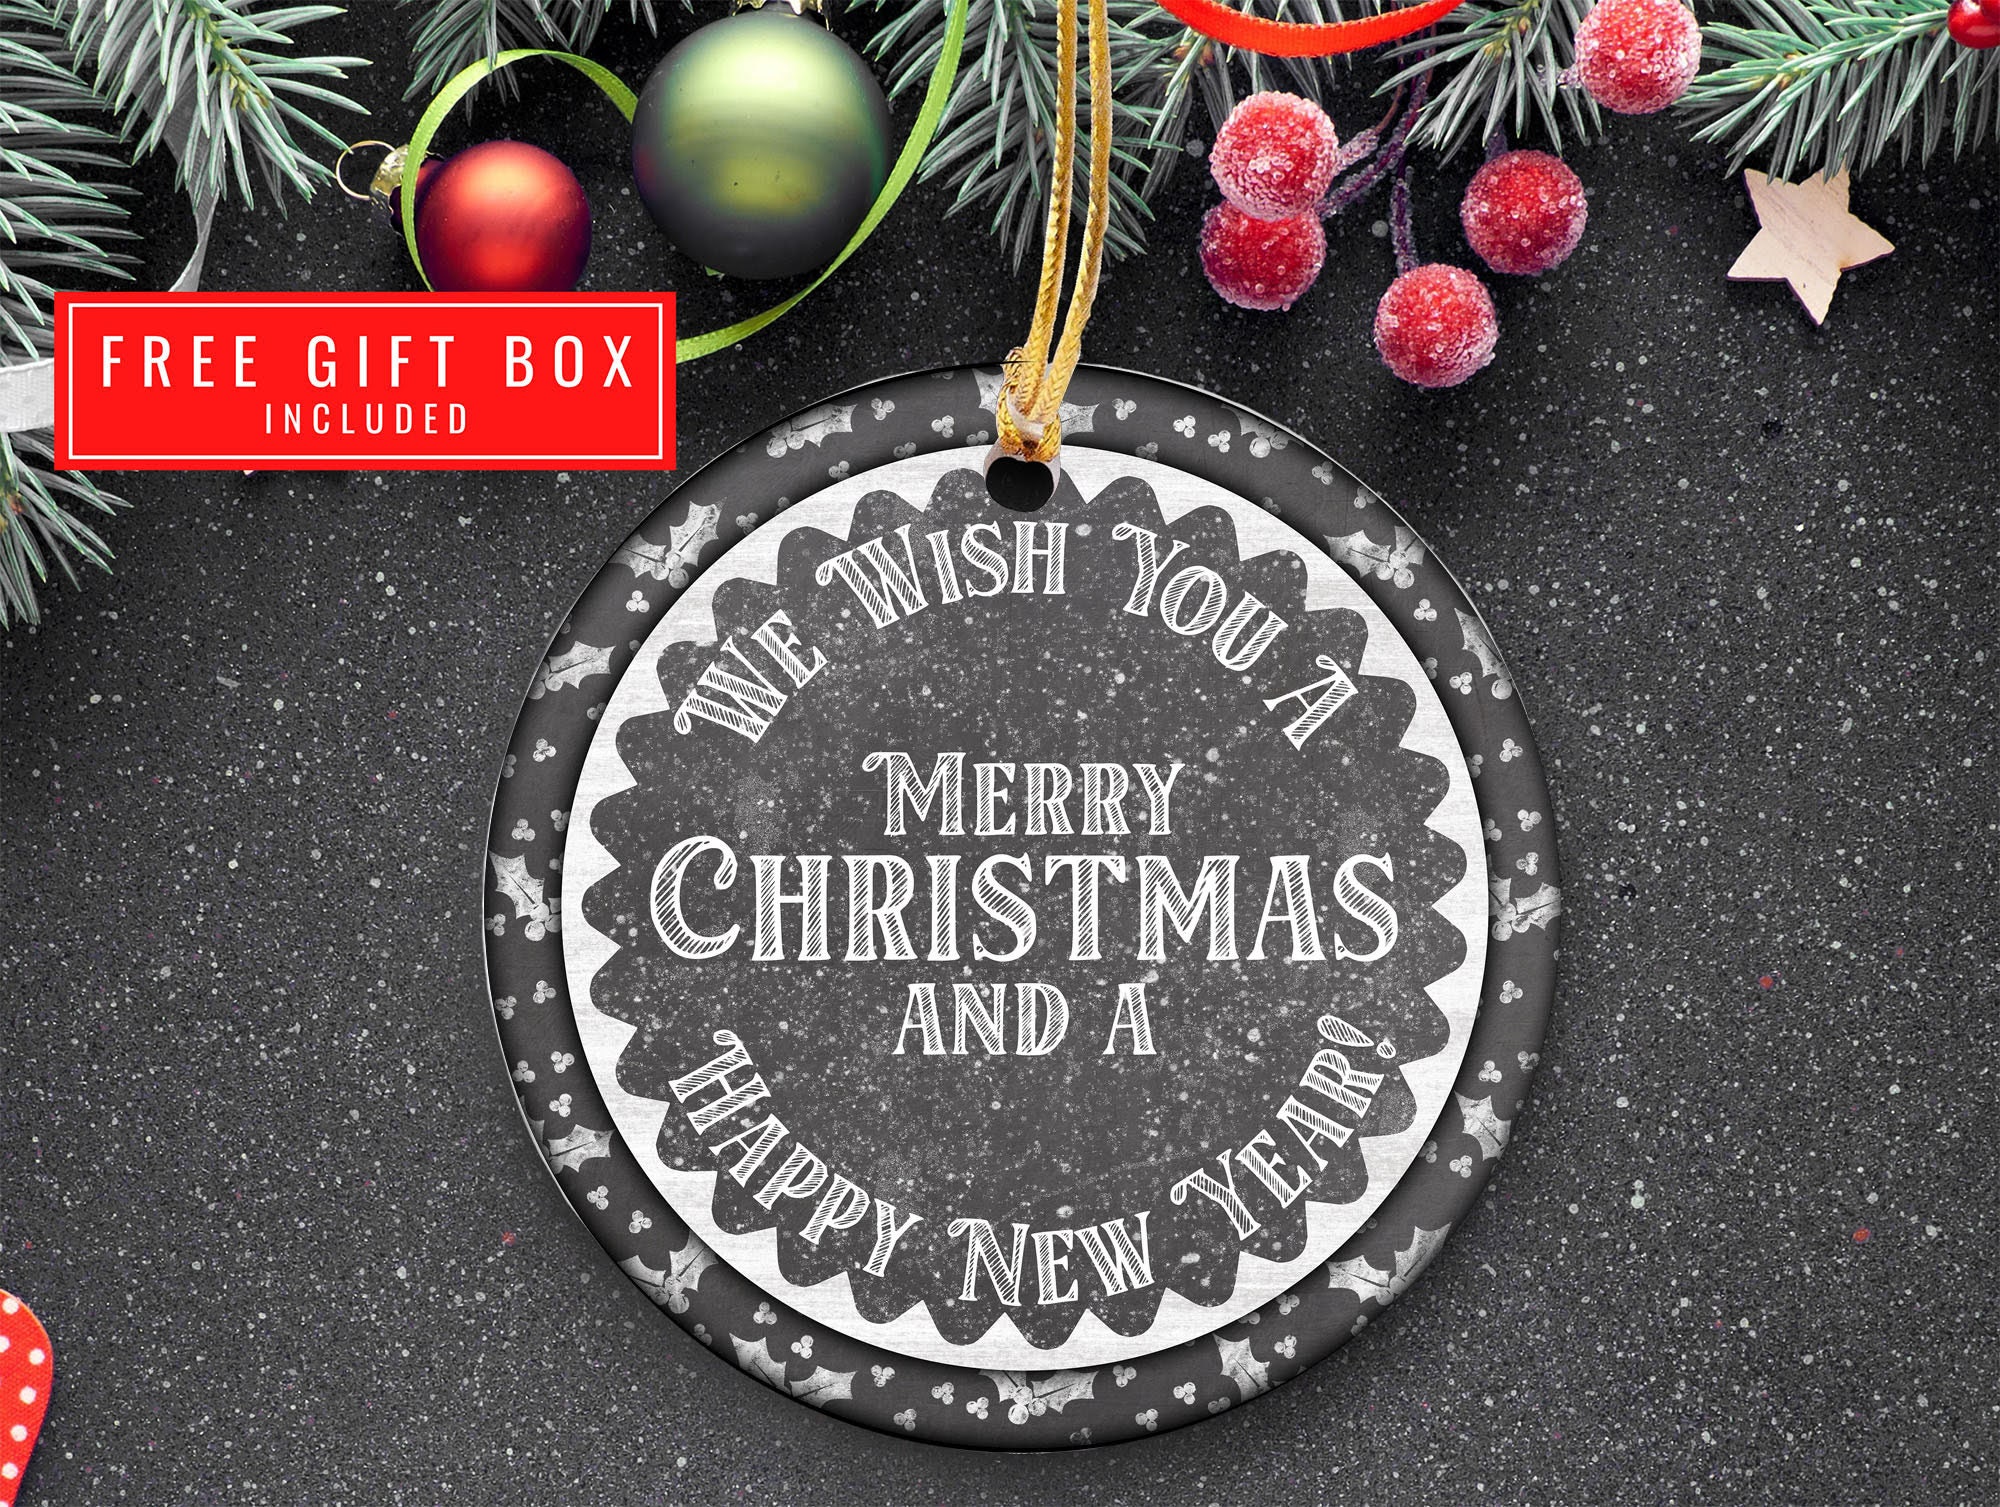 Memorial Ornament, Ceramic Ornament, We Wish You A Merry Christmas And A Happy New Year Ornament